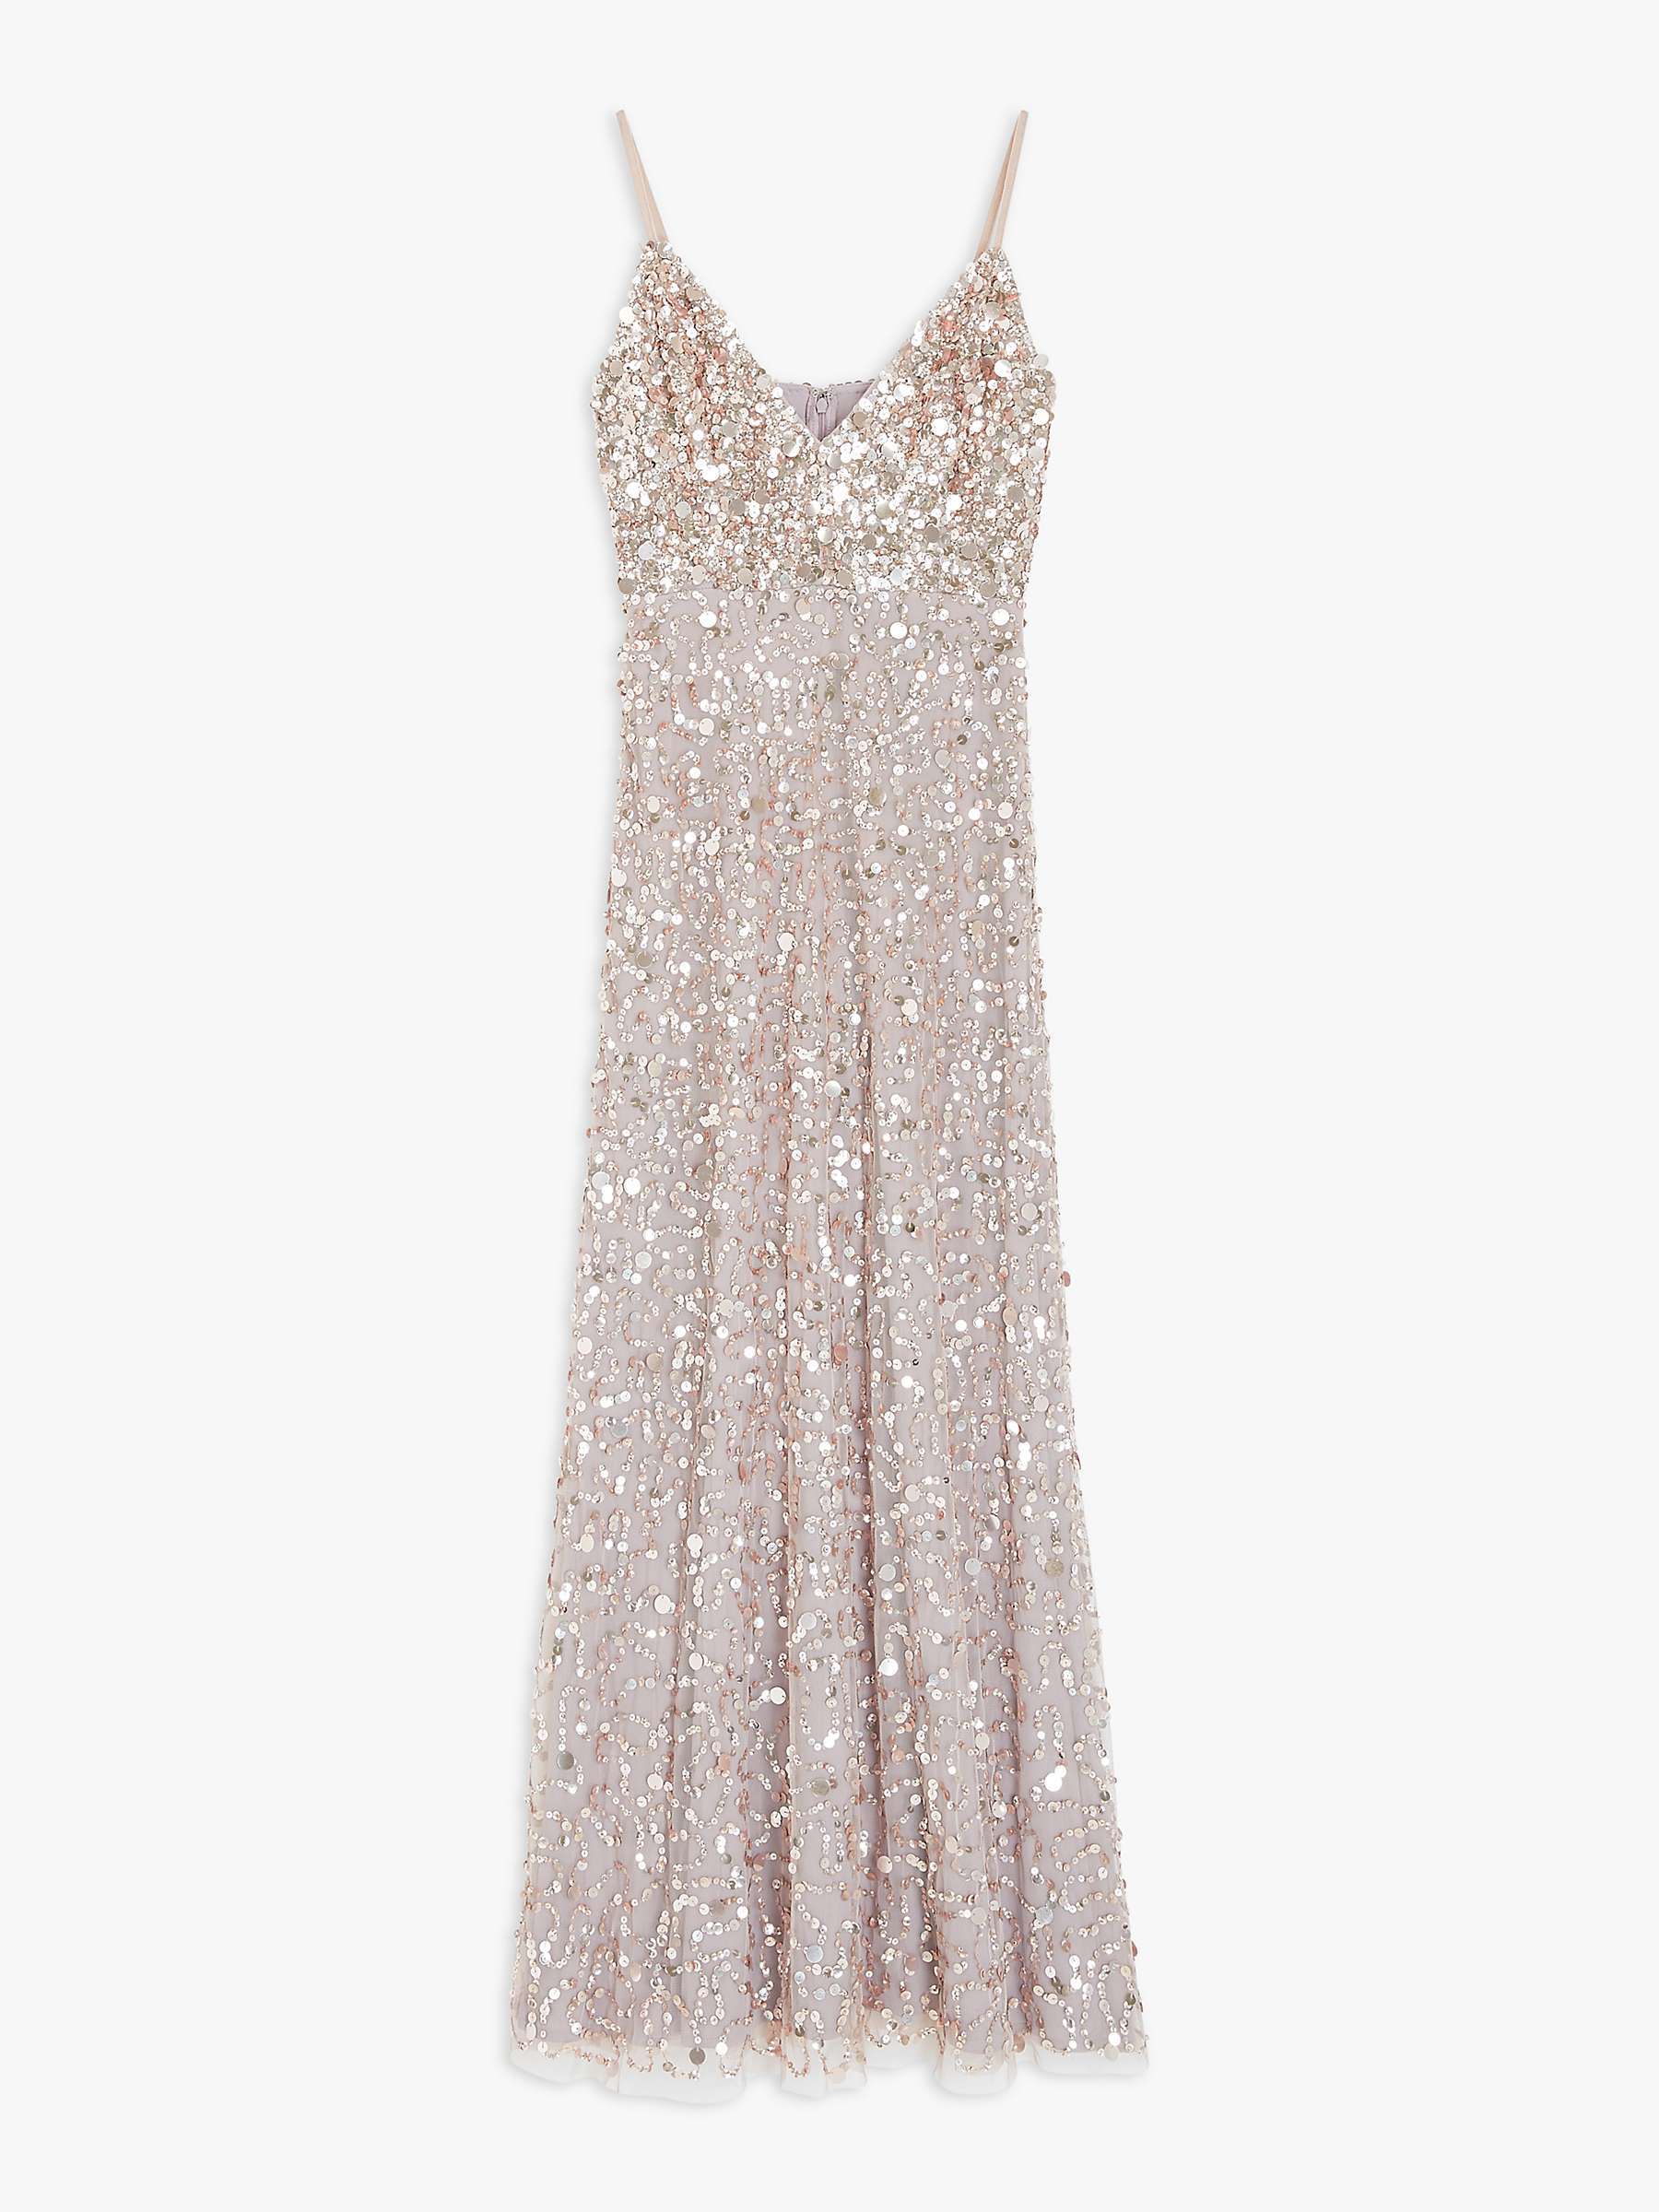 Buy Lace & Beads Betty Bead Embellished Maxi Dress, Champagne Online at johnlewis.com